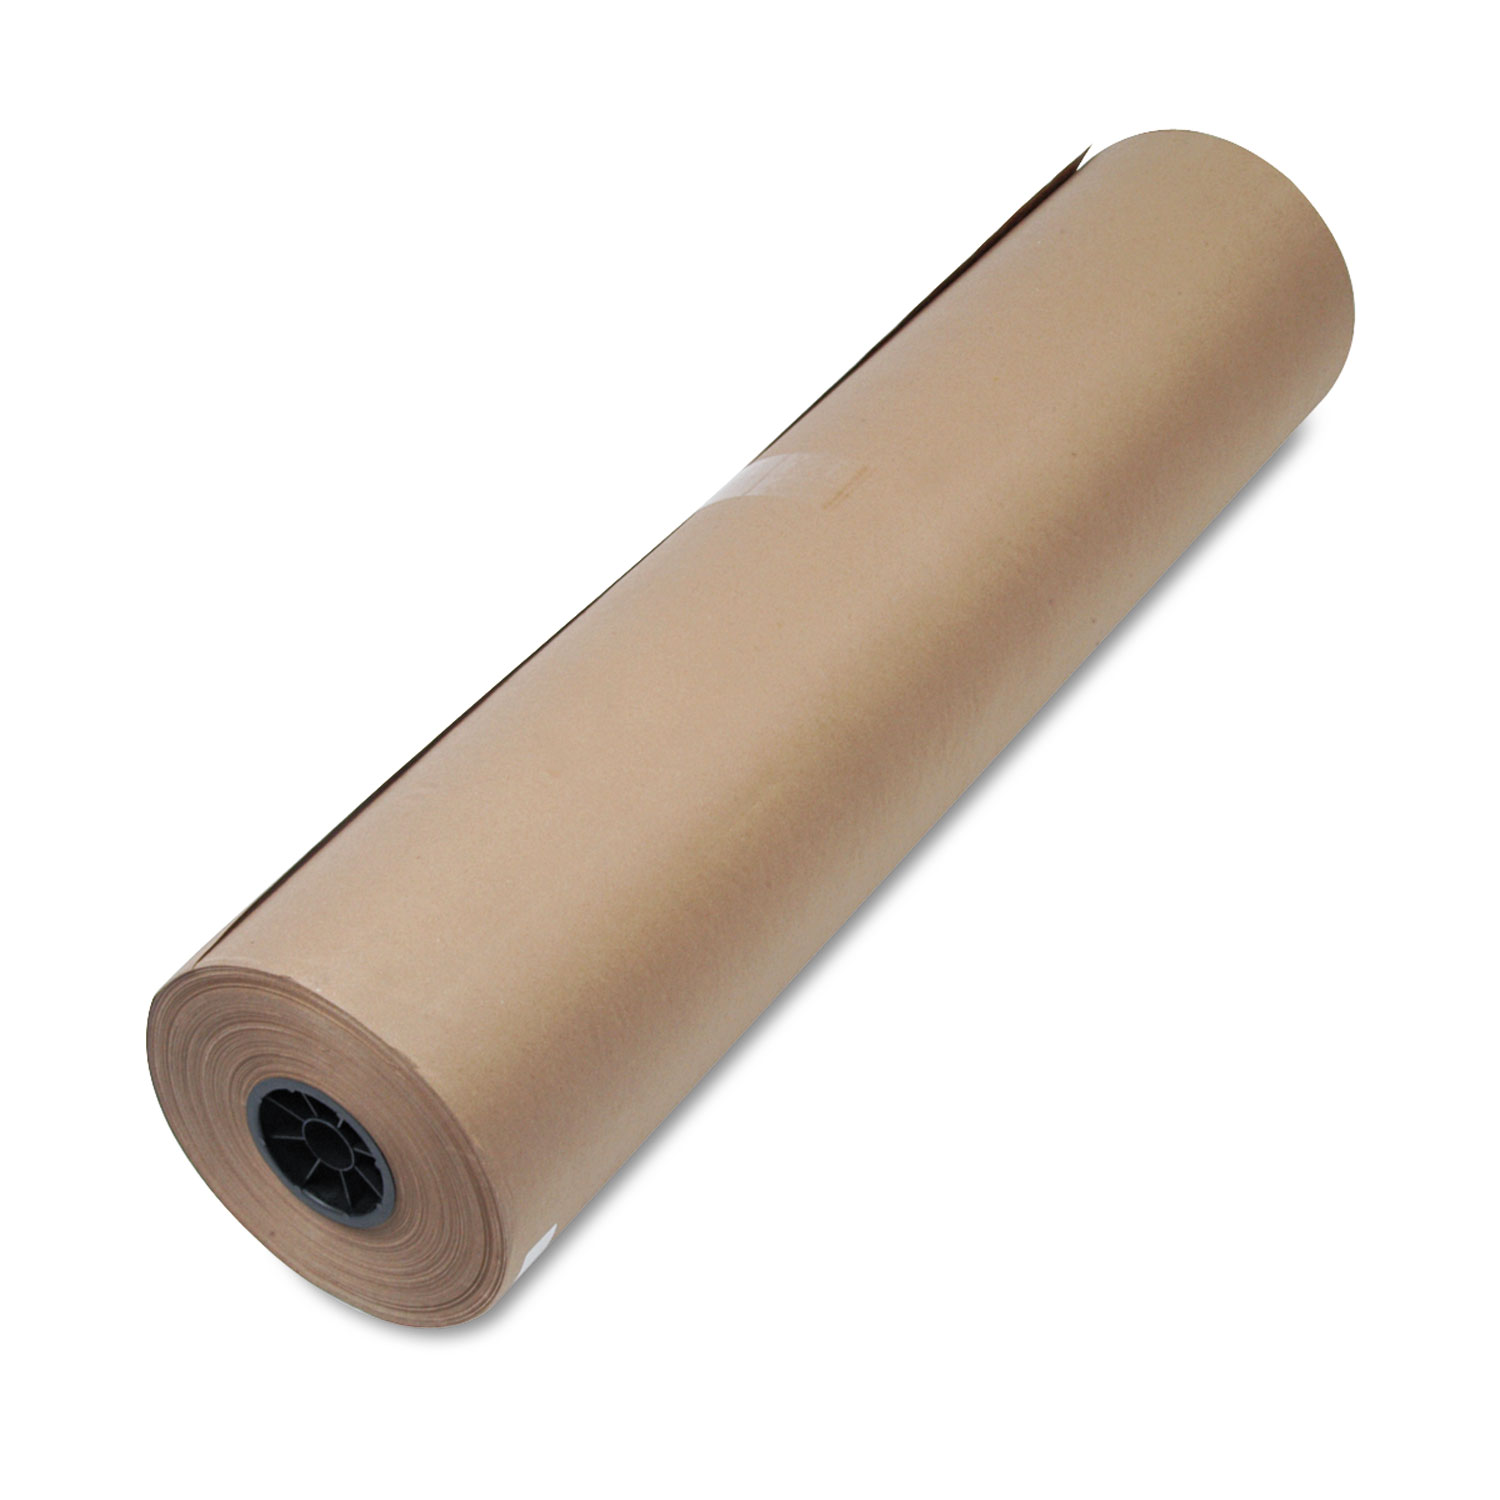 General Supply UFS1300053 High-Volume Wrapping Paper, 50lb, 36"w, 720'l, Brown